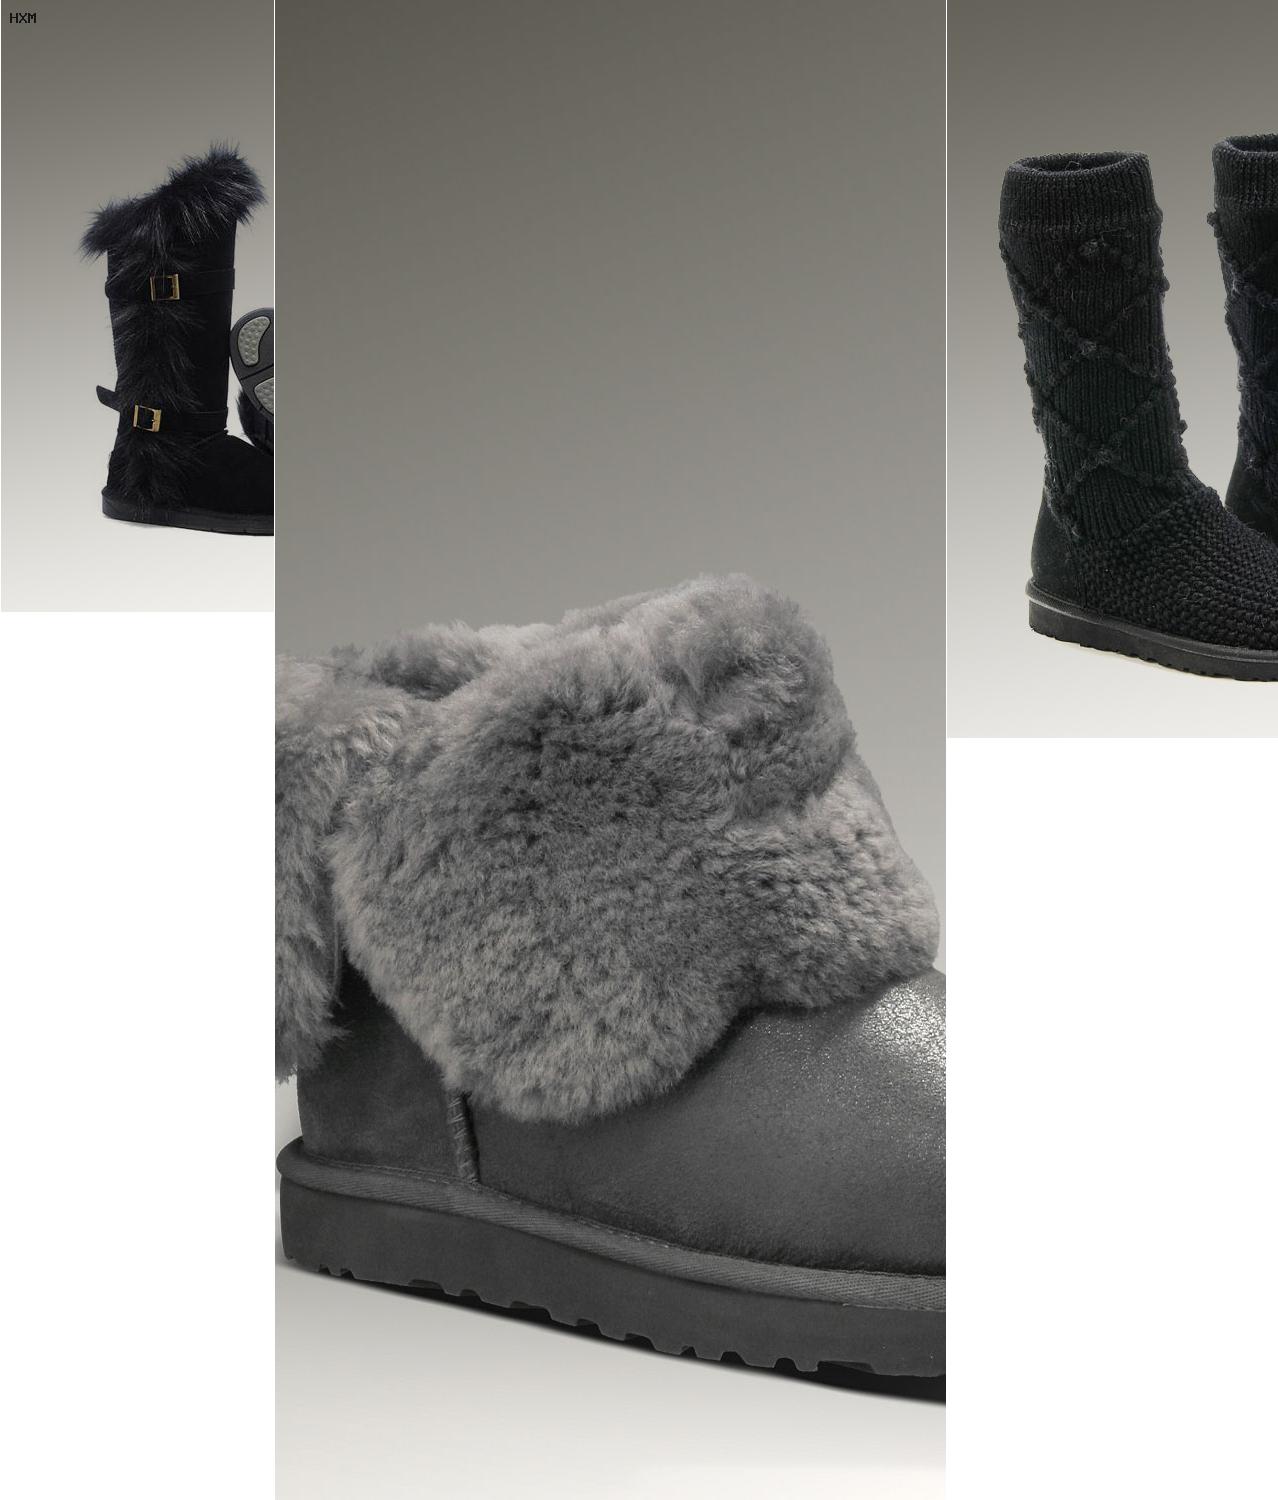 moon boots style ugg